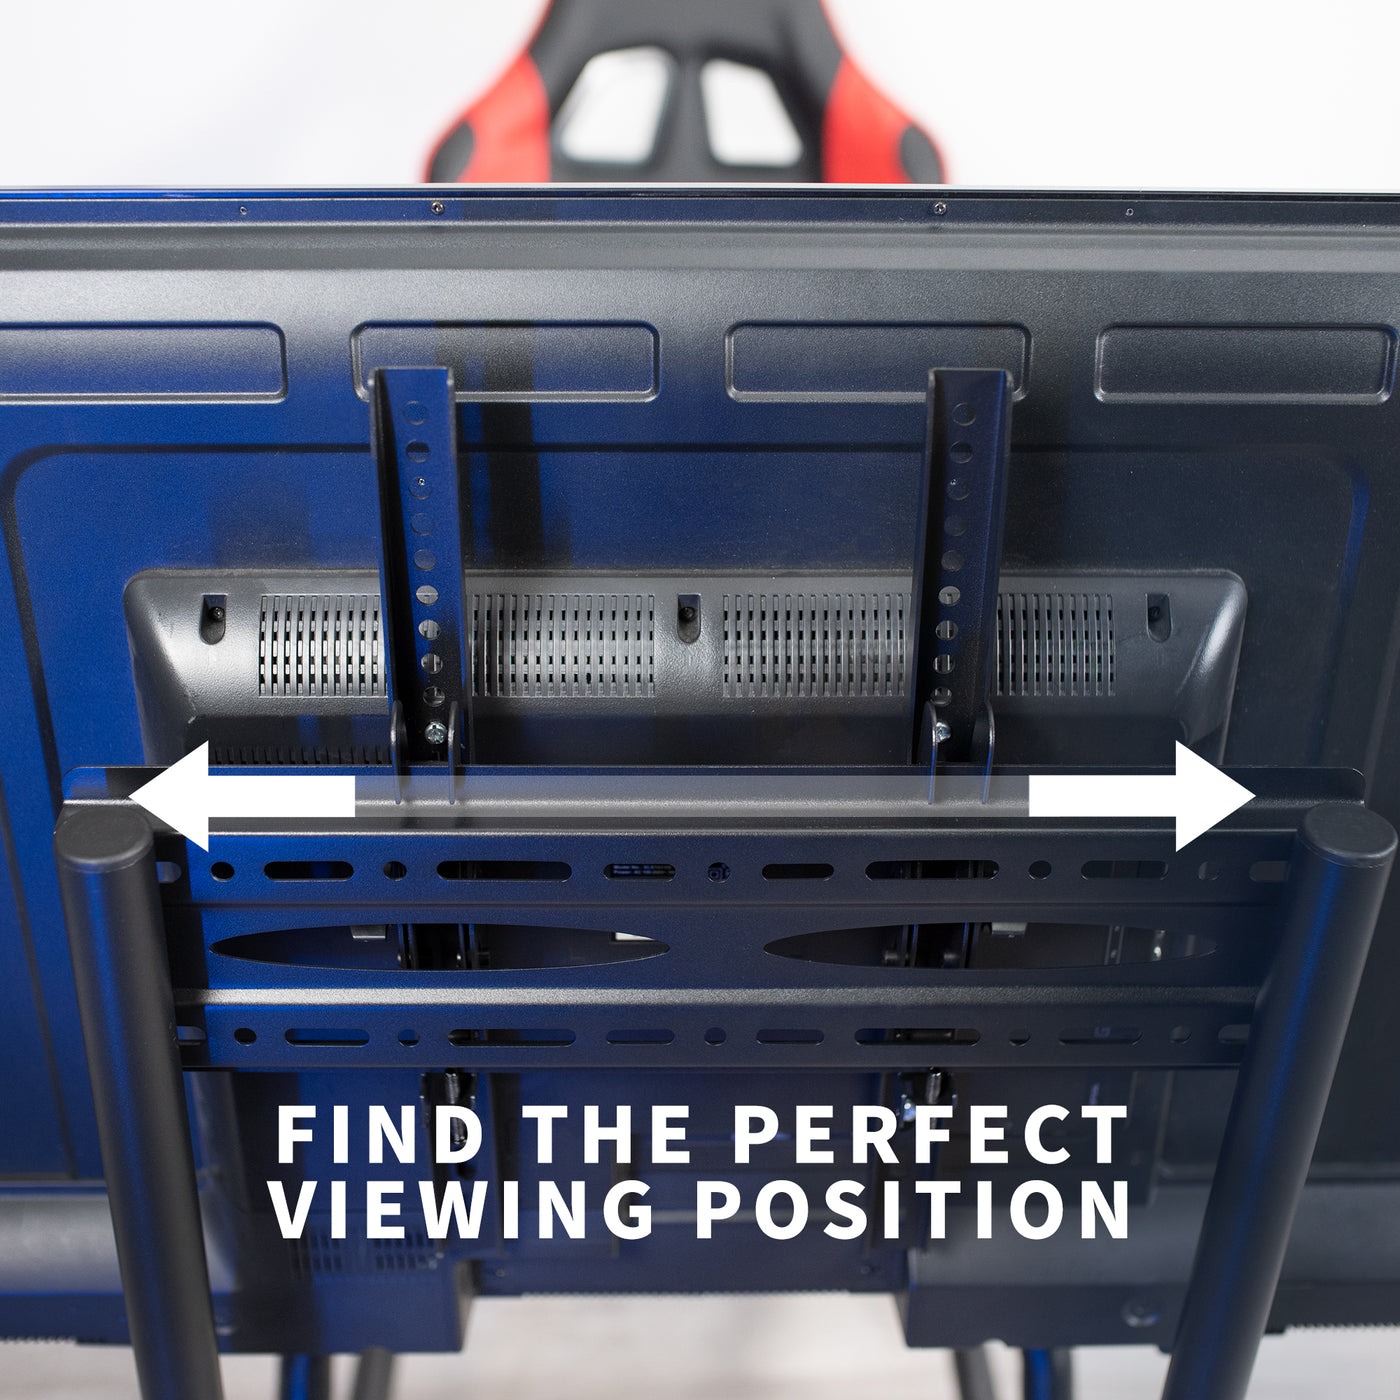 Adjustable mount to maximize the perfect viewing position.